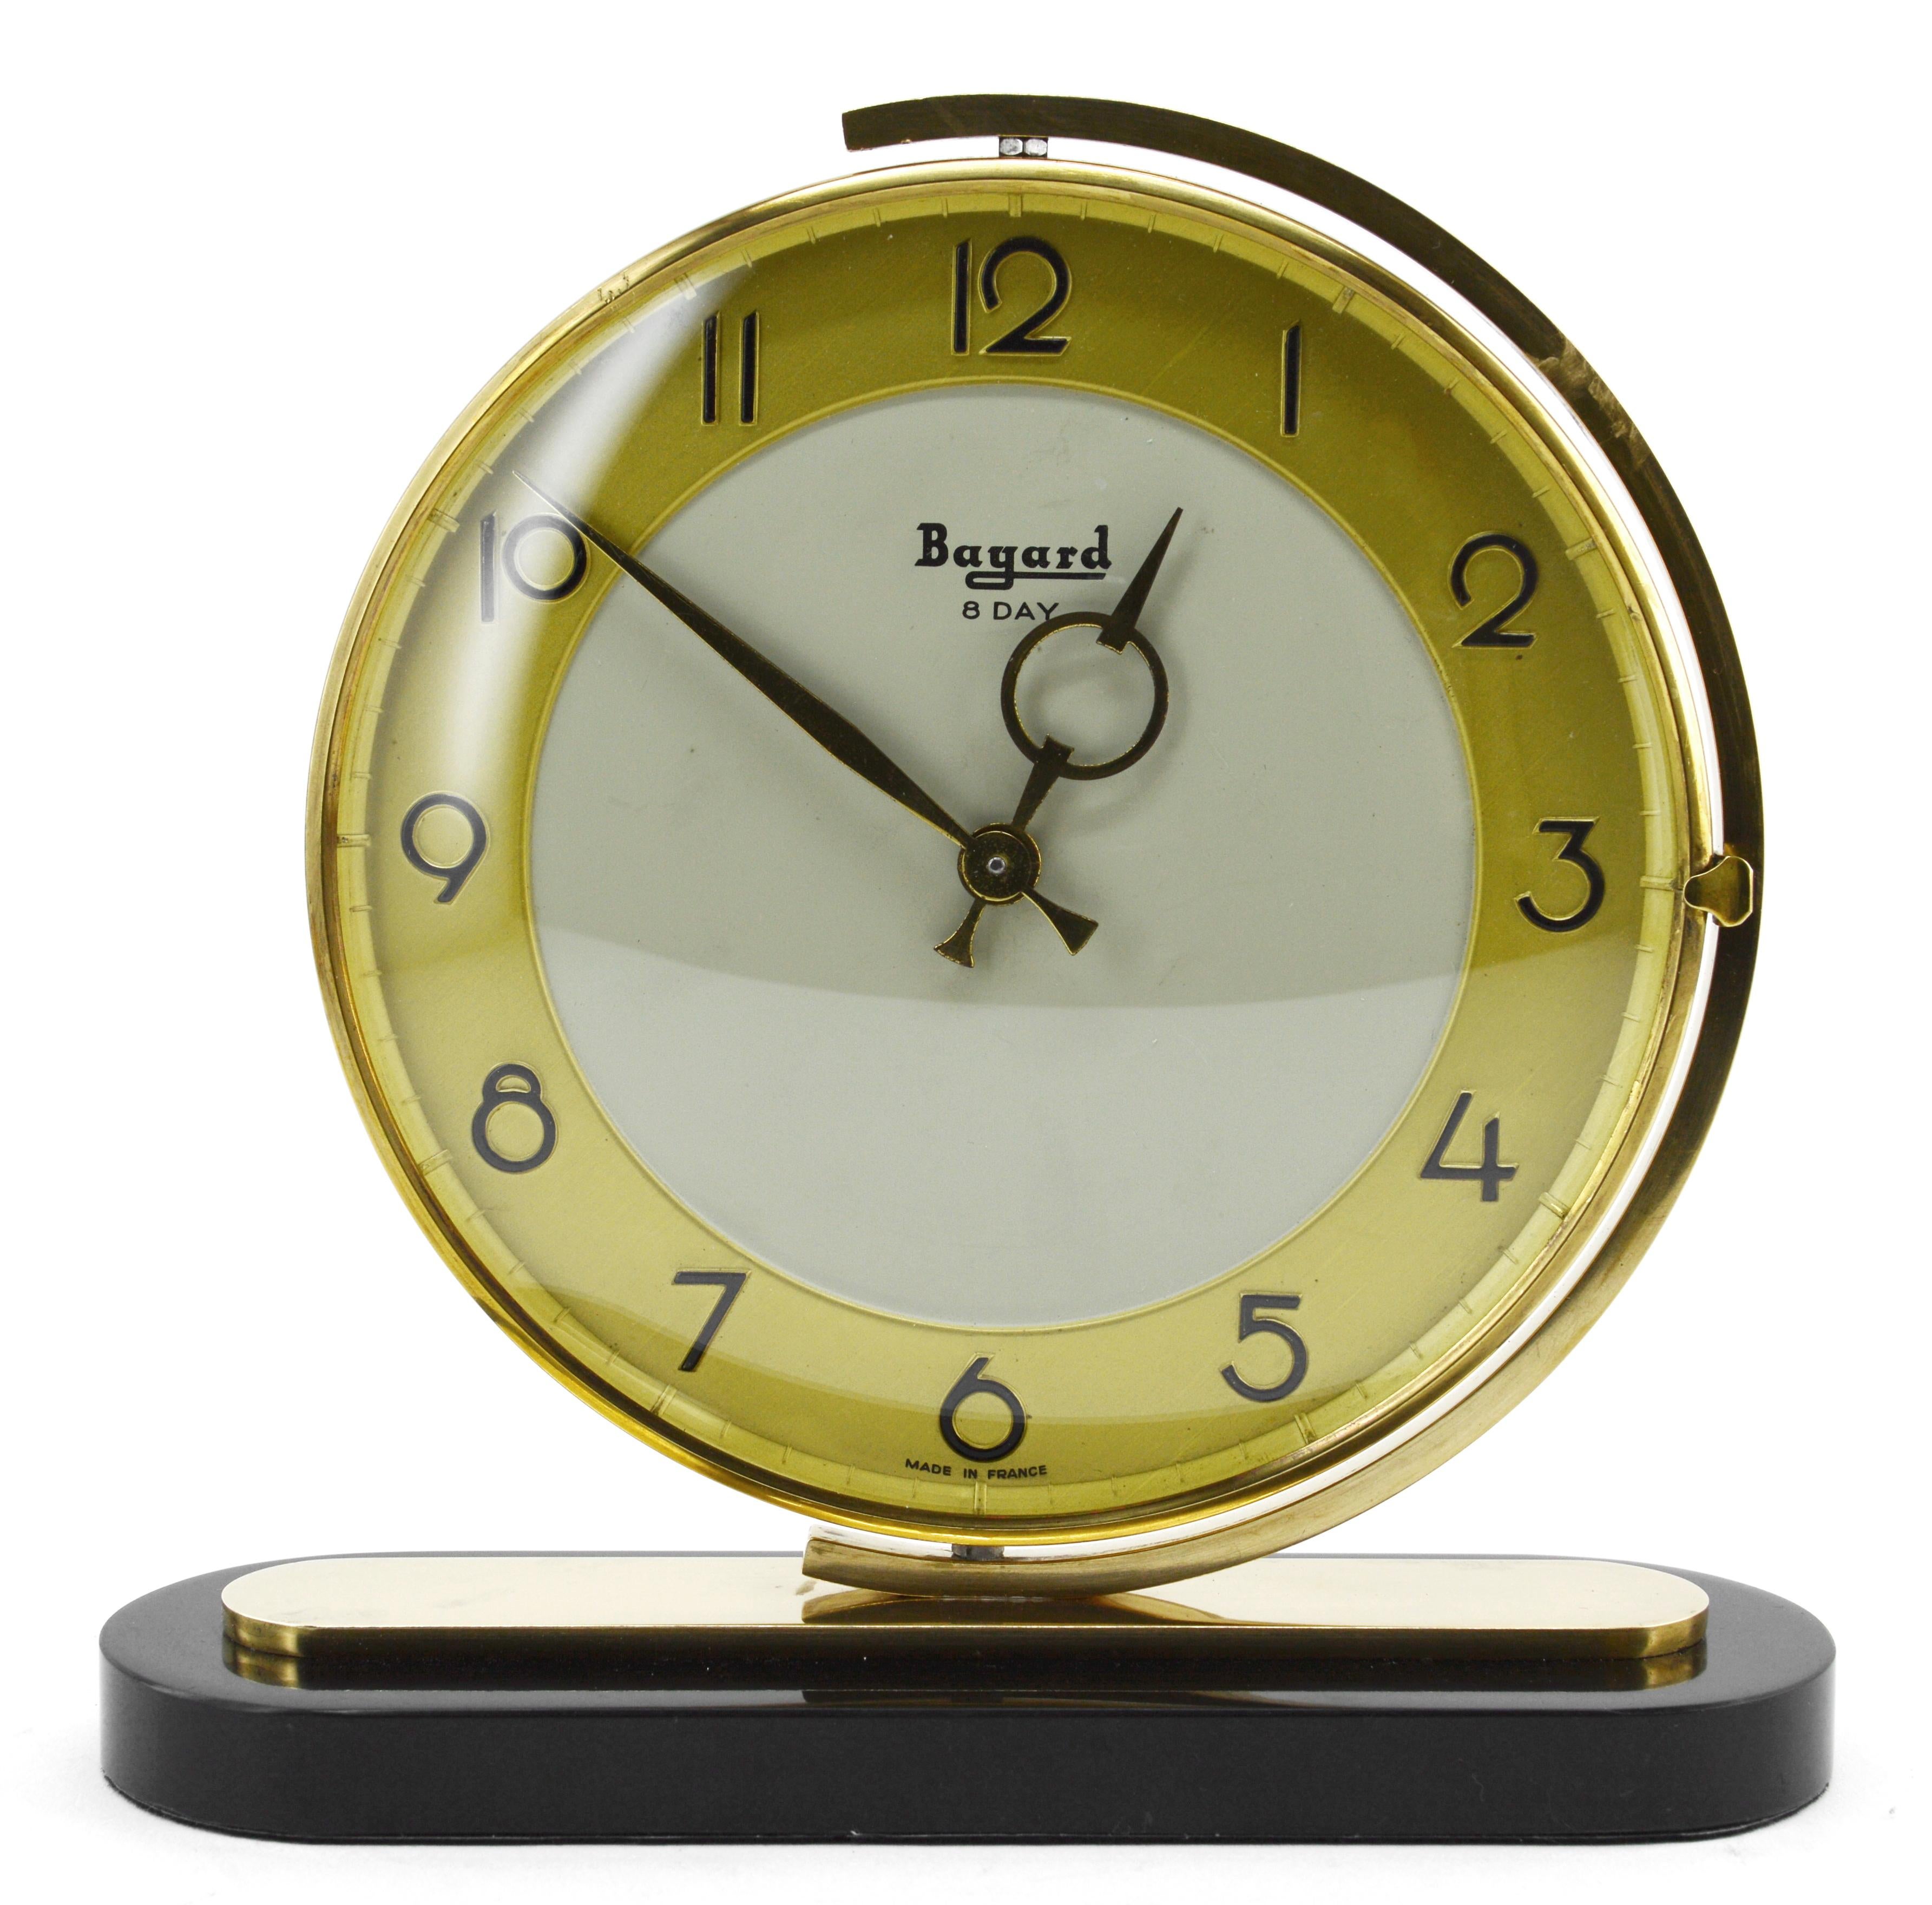 French Art Deco table clock by Bayard, France, 1930s. Brass, marble and glass. Swivelling brass dial. Marble base. Rounded glass. 8 days movement.
Original mechanism. Works perfectly.